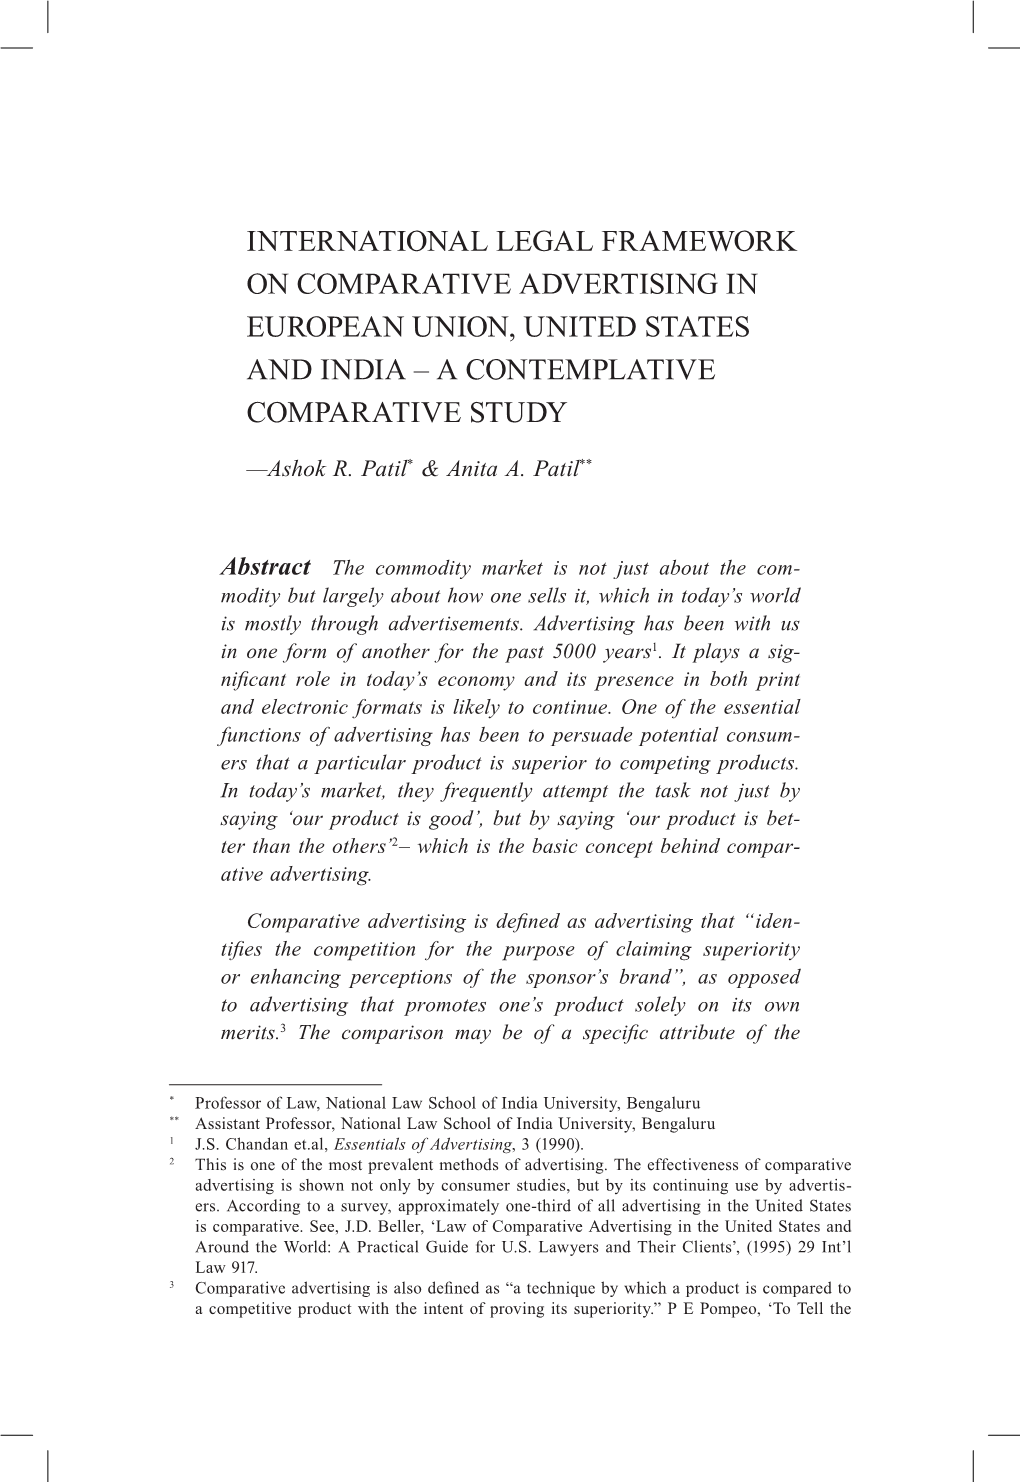 International Legal Framework on Comparative Advertising in European Union, United States and India – a Contemplative Comparative Study